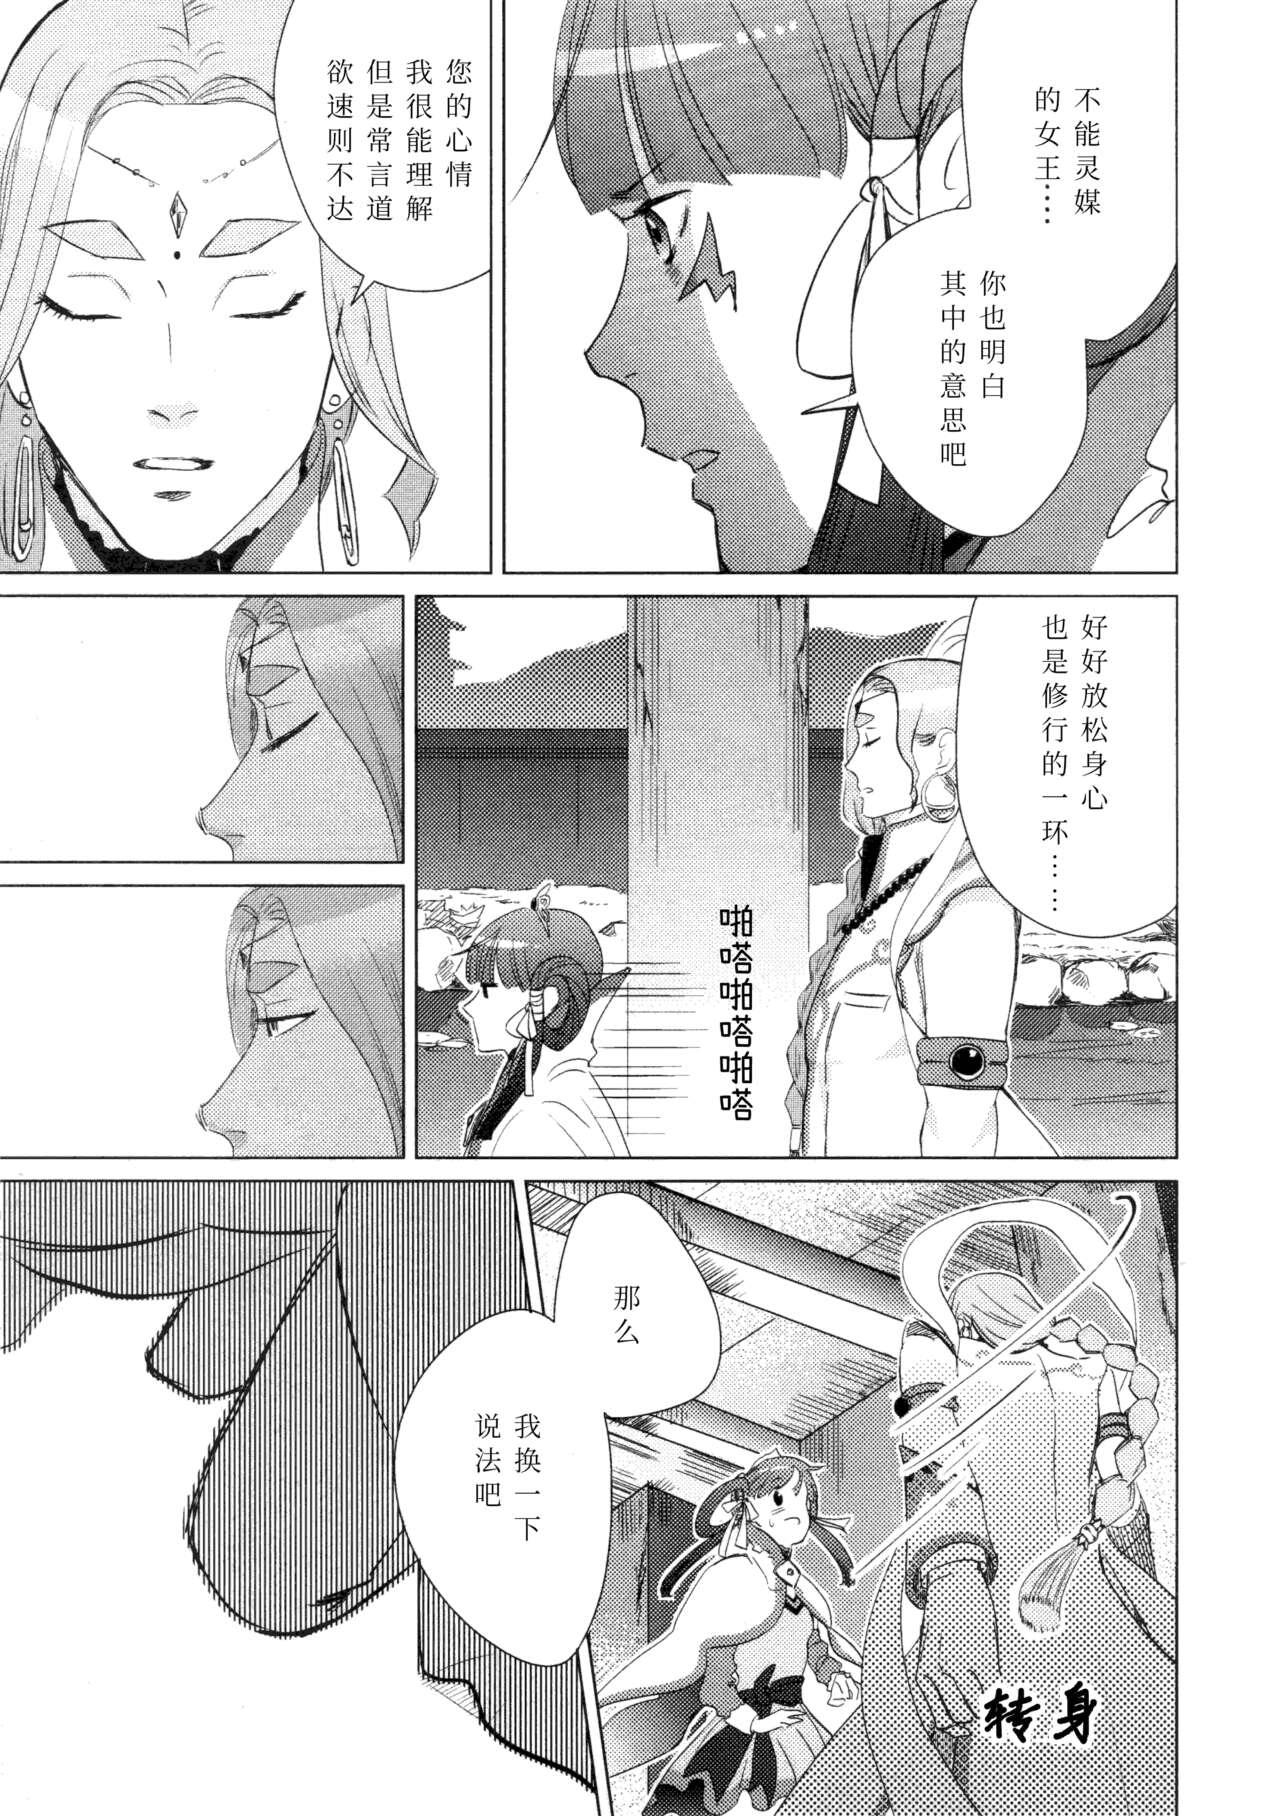 Dildo Fucking Don't leave me alone,my big LITTLE brother - Ace attorney | gyakuten saiban Kiss - Page 12